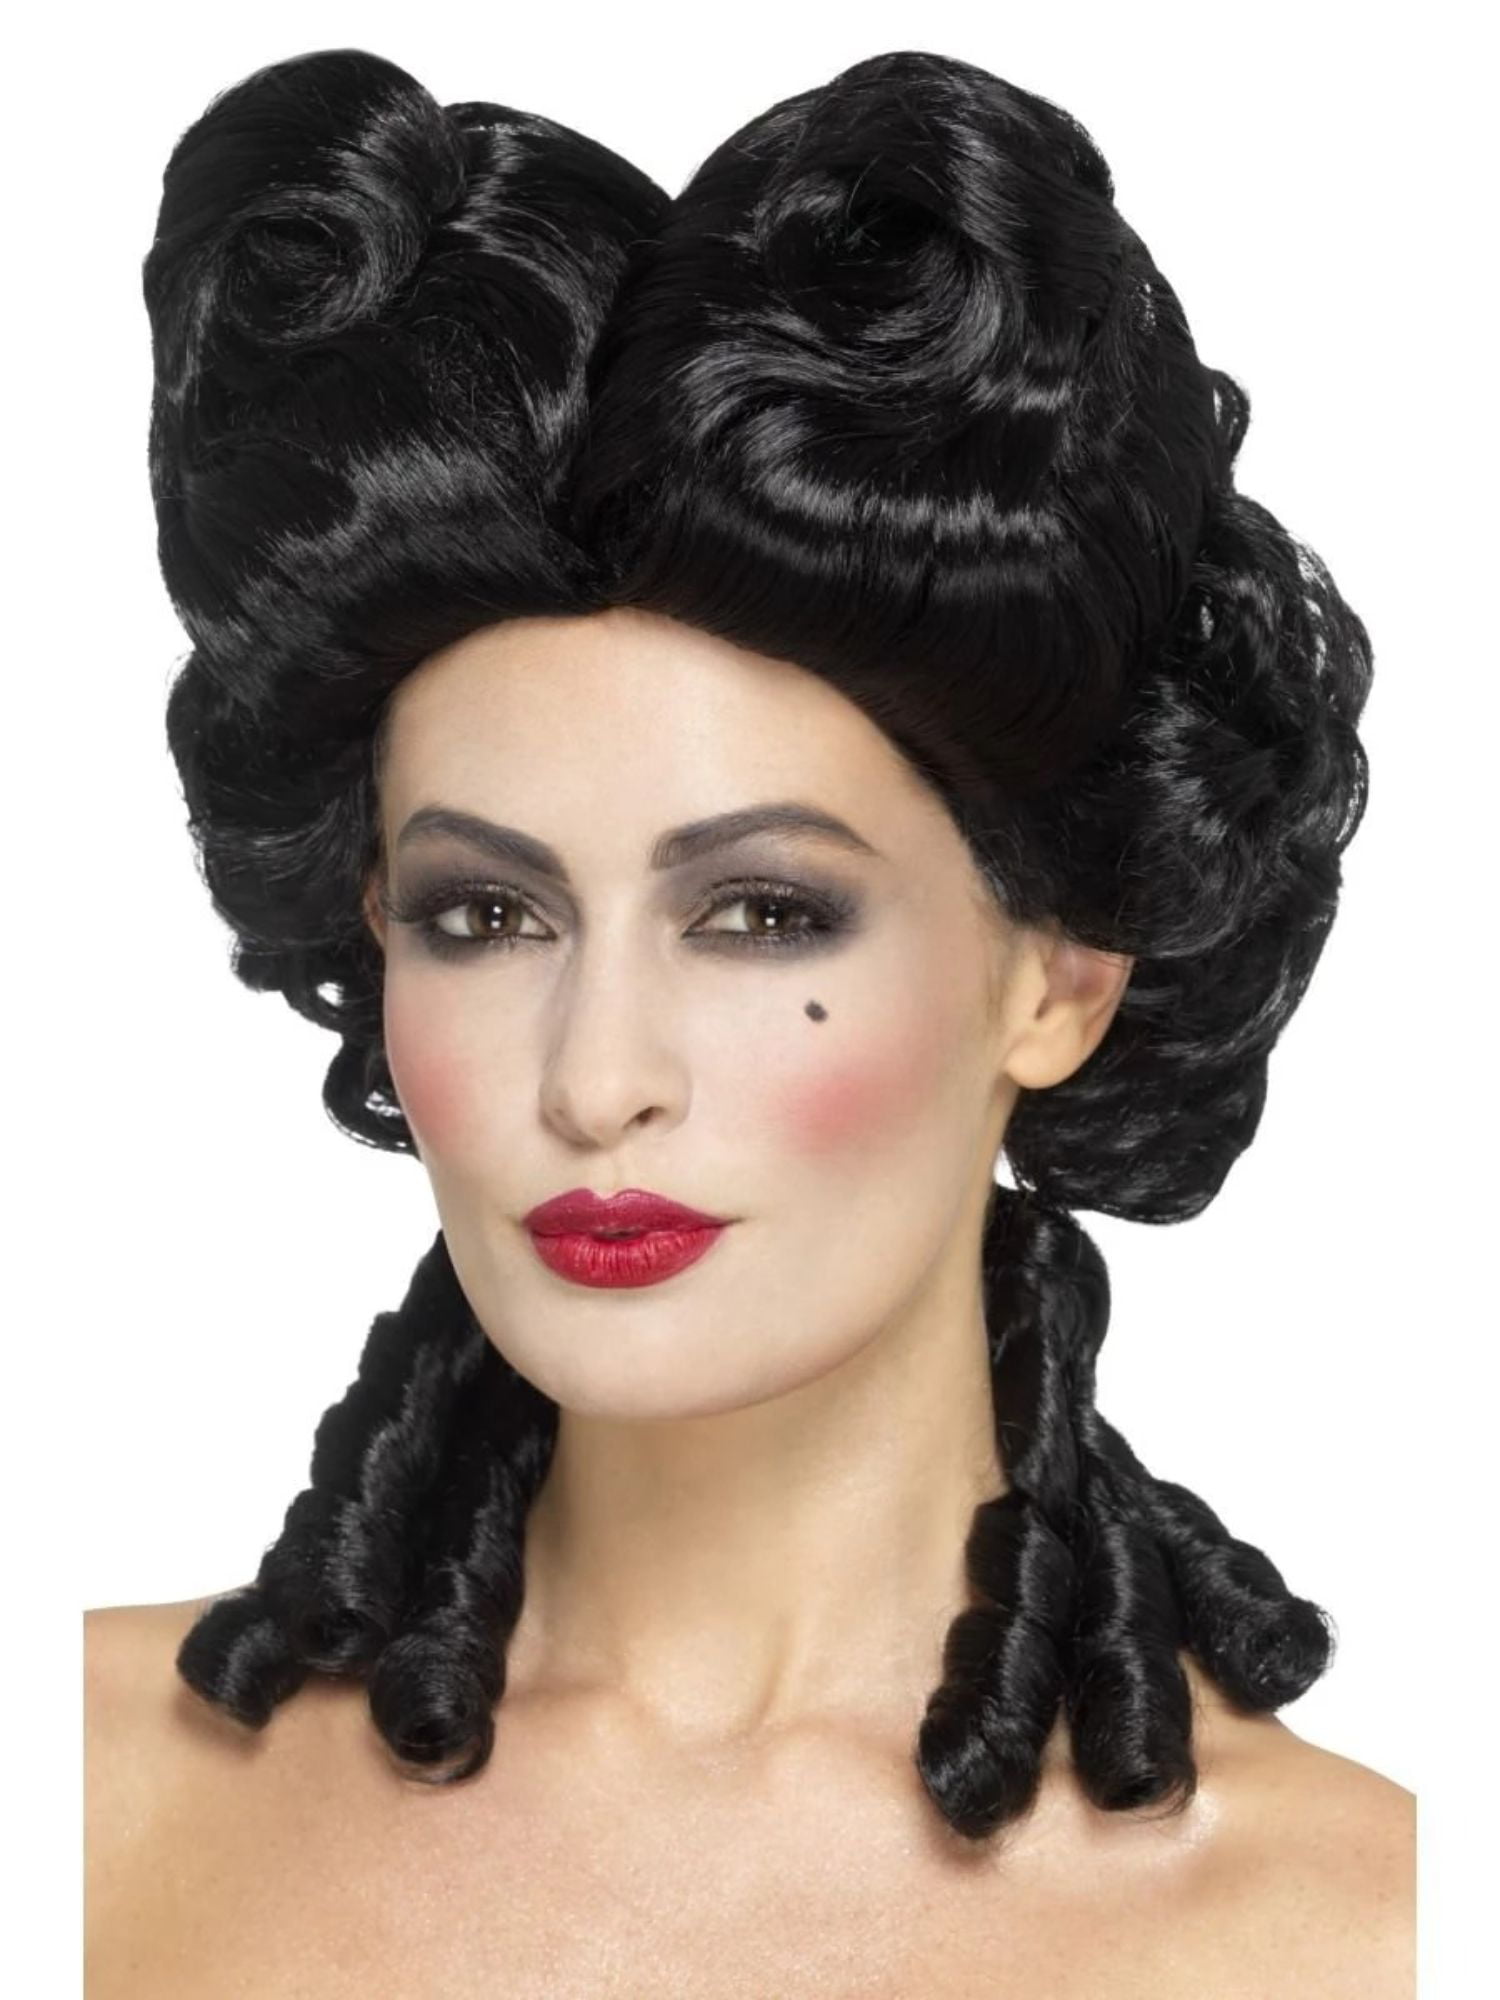 Baroque Wig Cosplay Caribbean Pirate BLACK Gothic